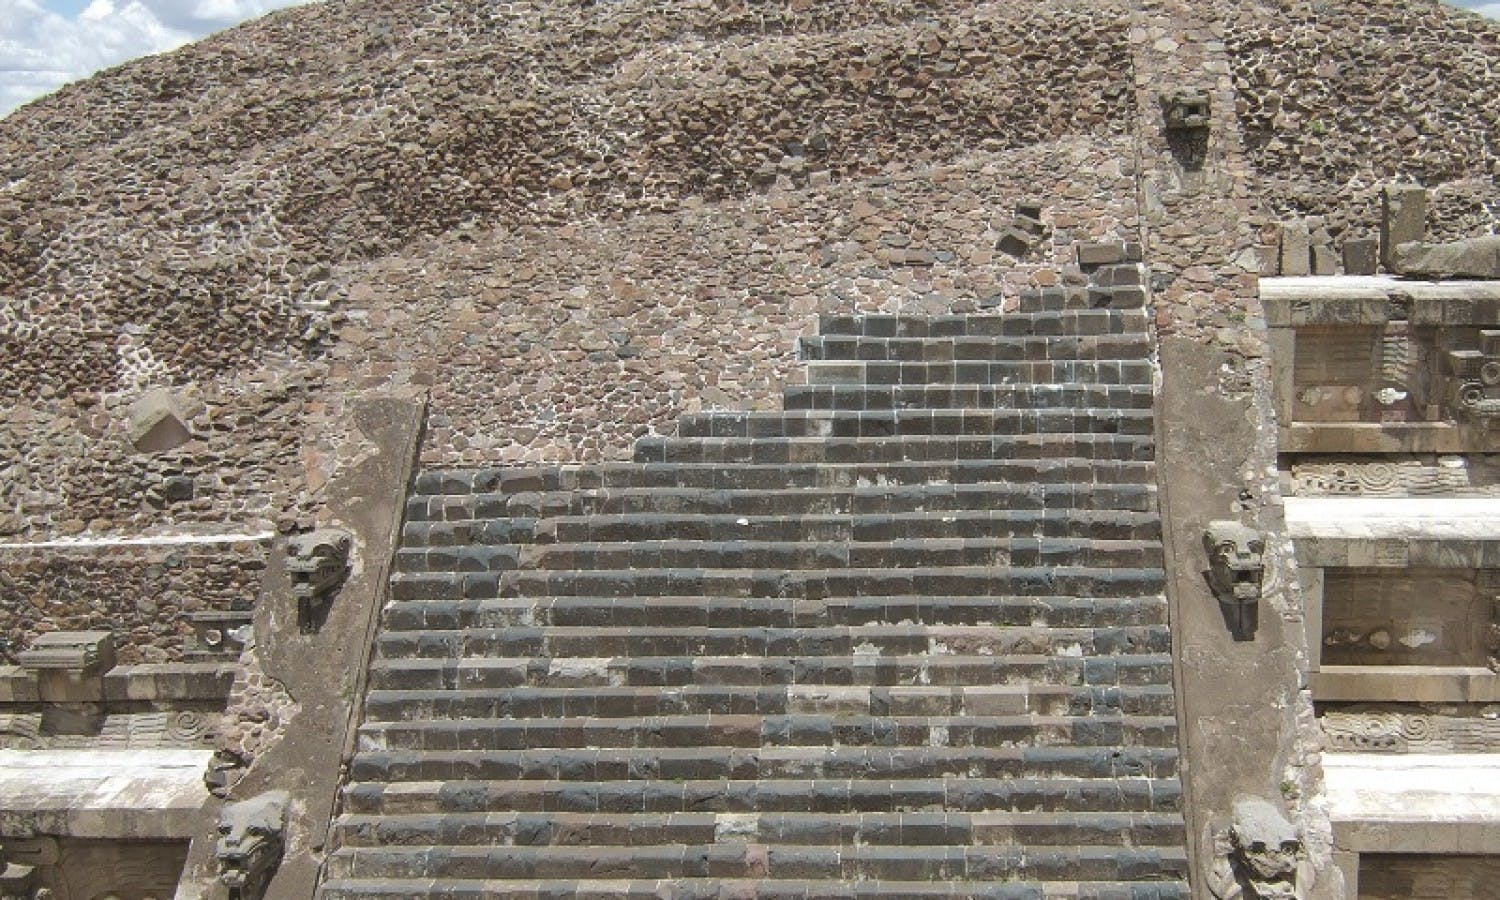 Early Teotihuacan Tour